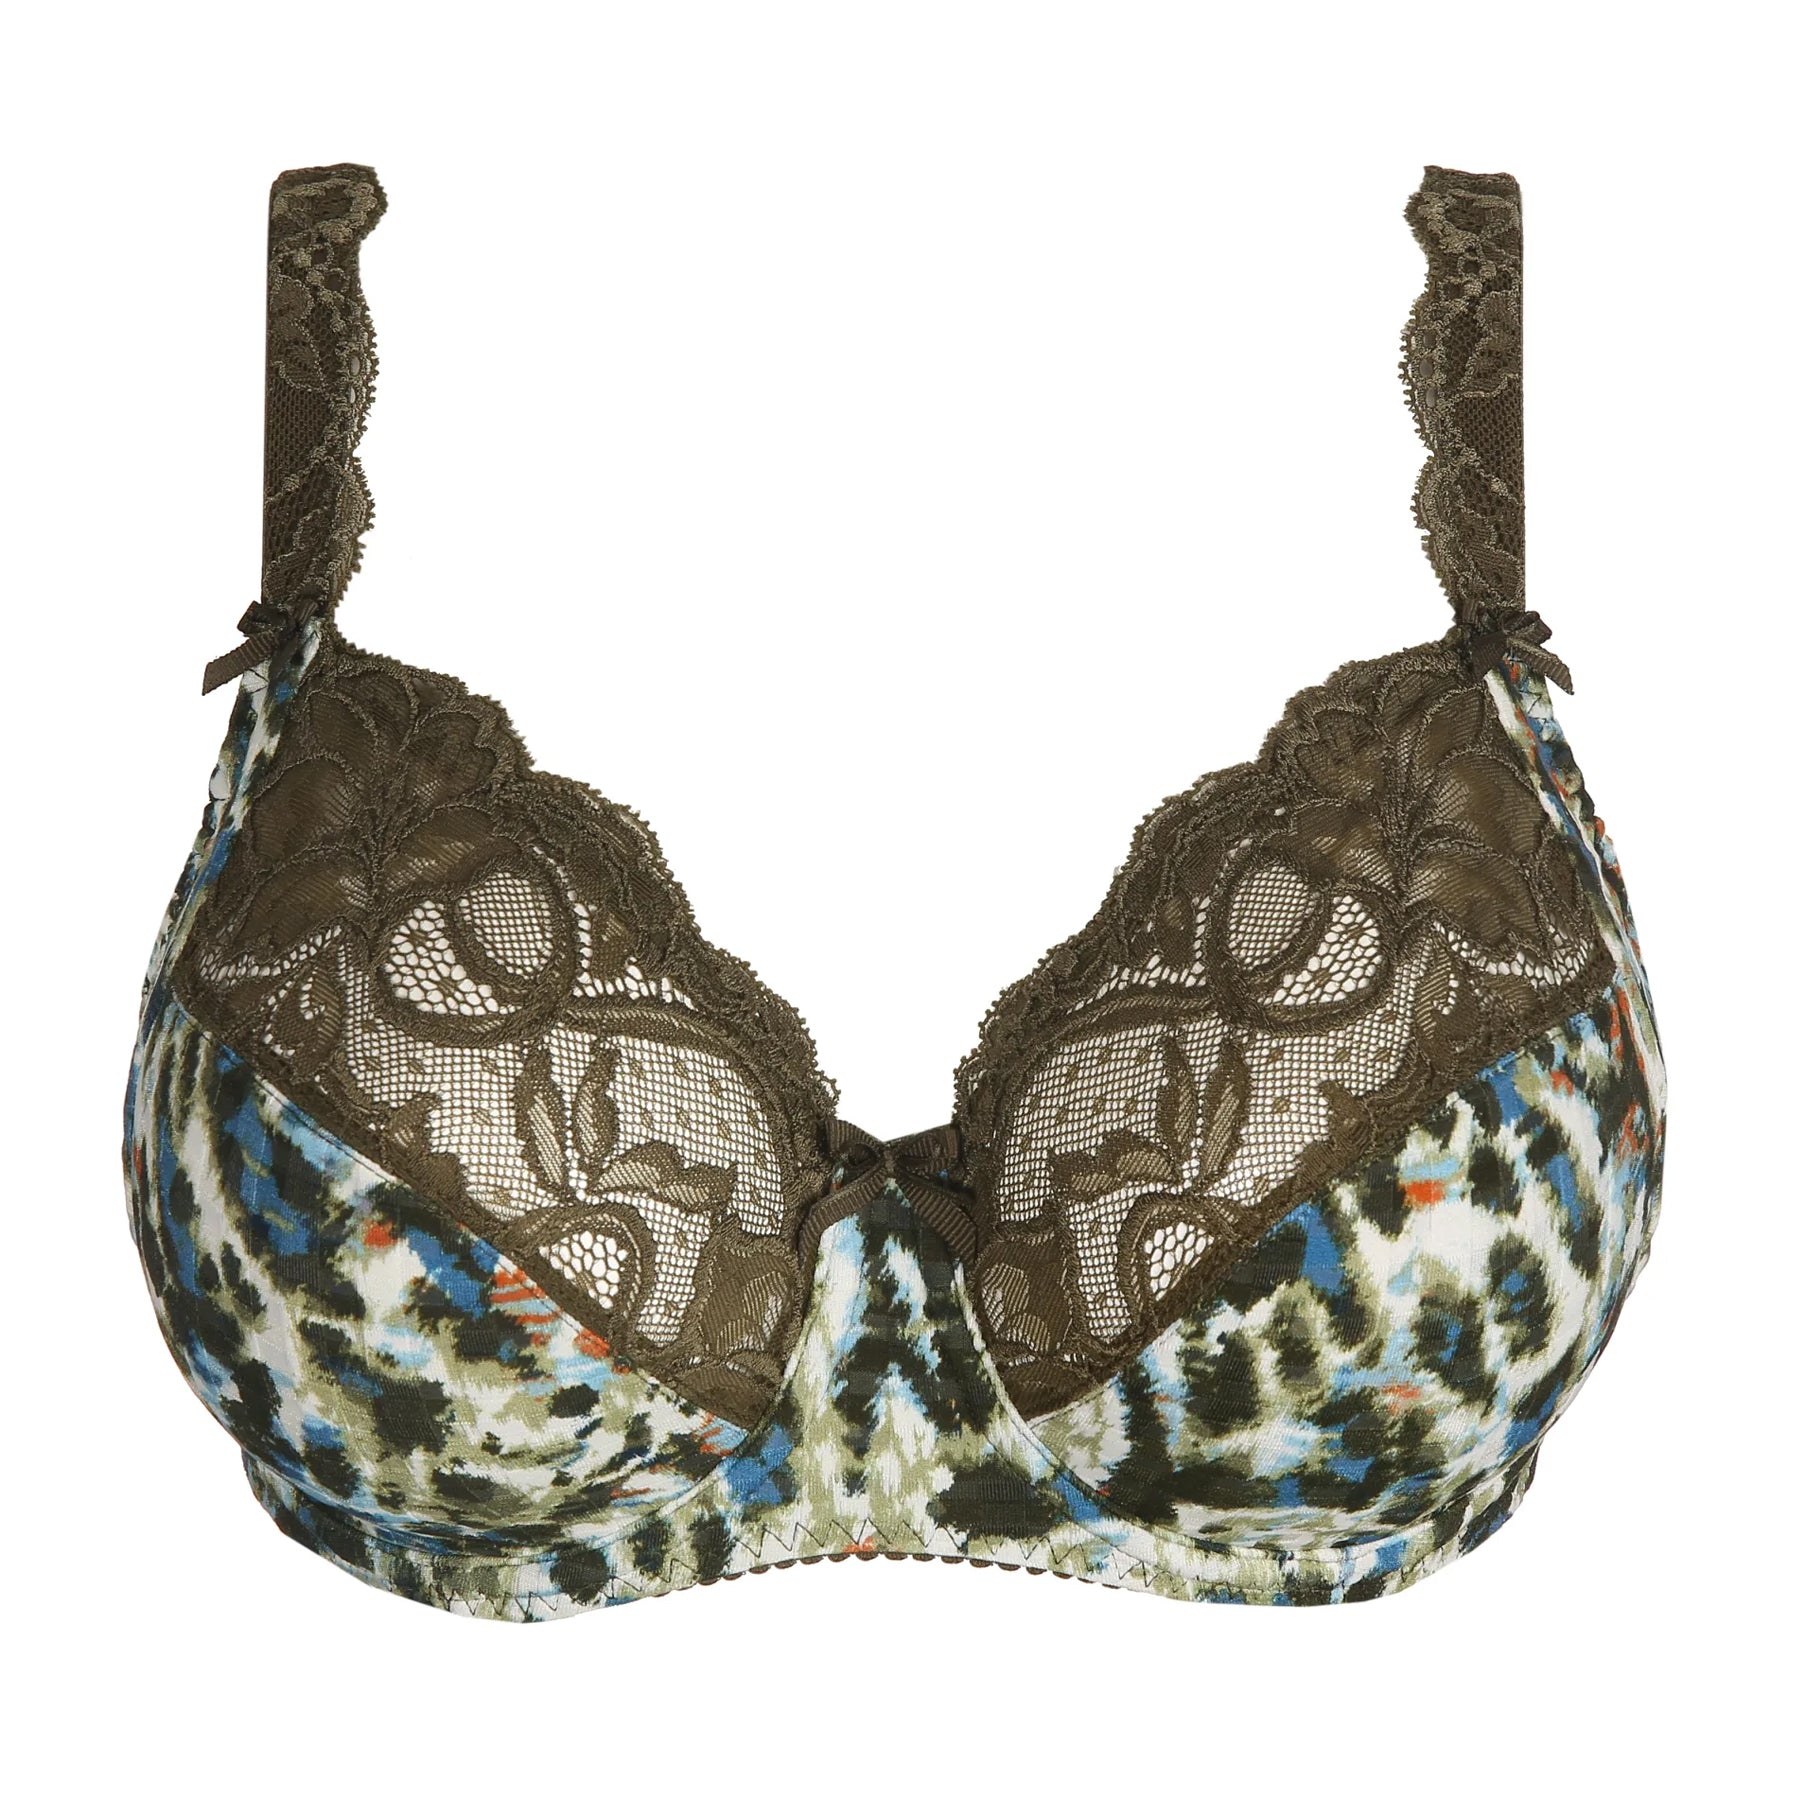 PrimaDonna Madison Collection Our Best Selling Bra